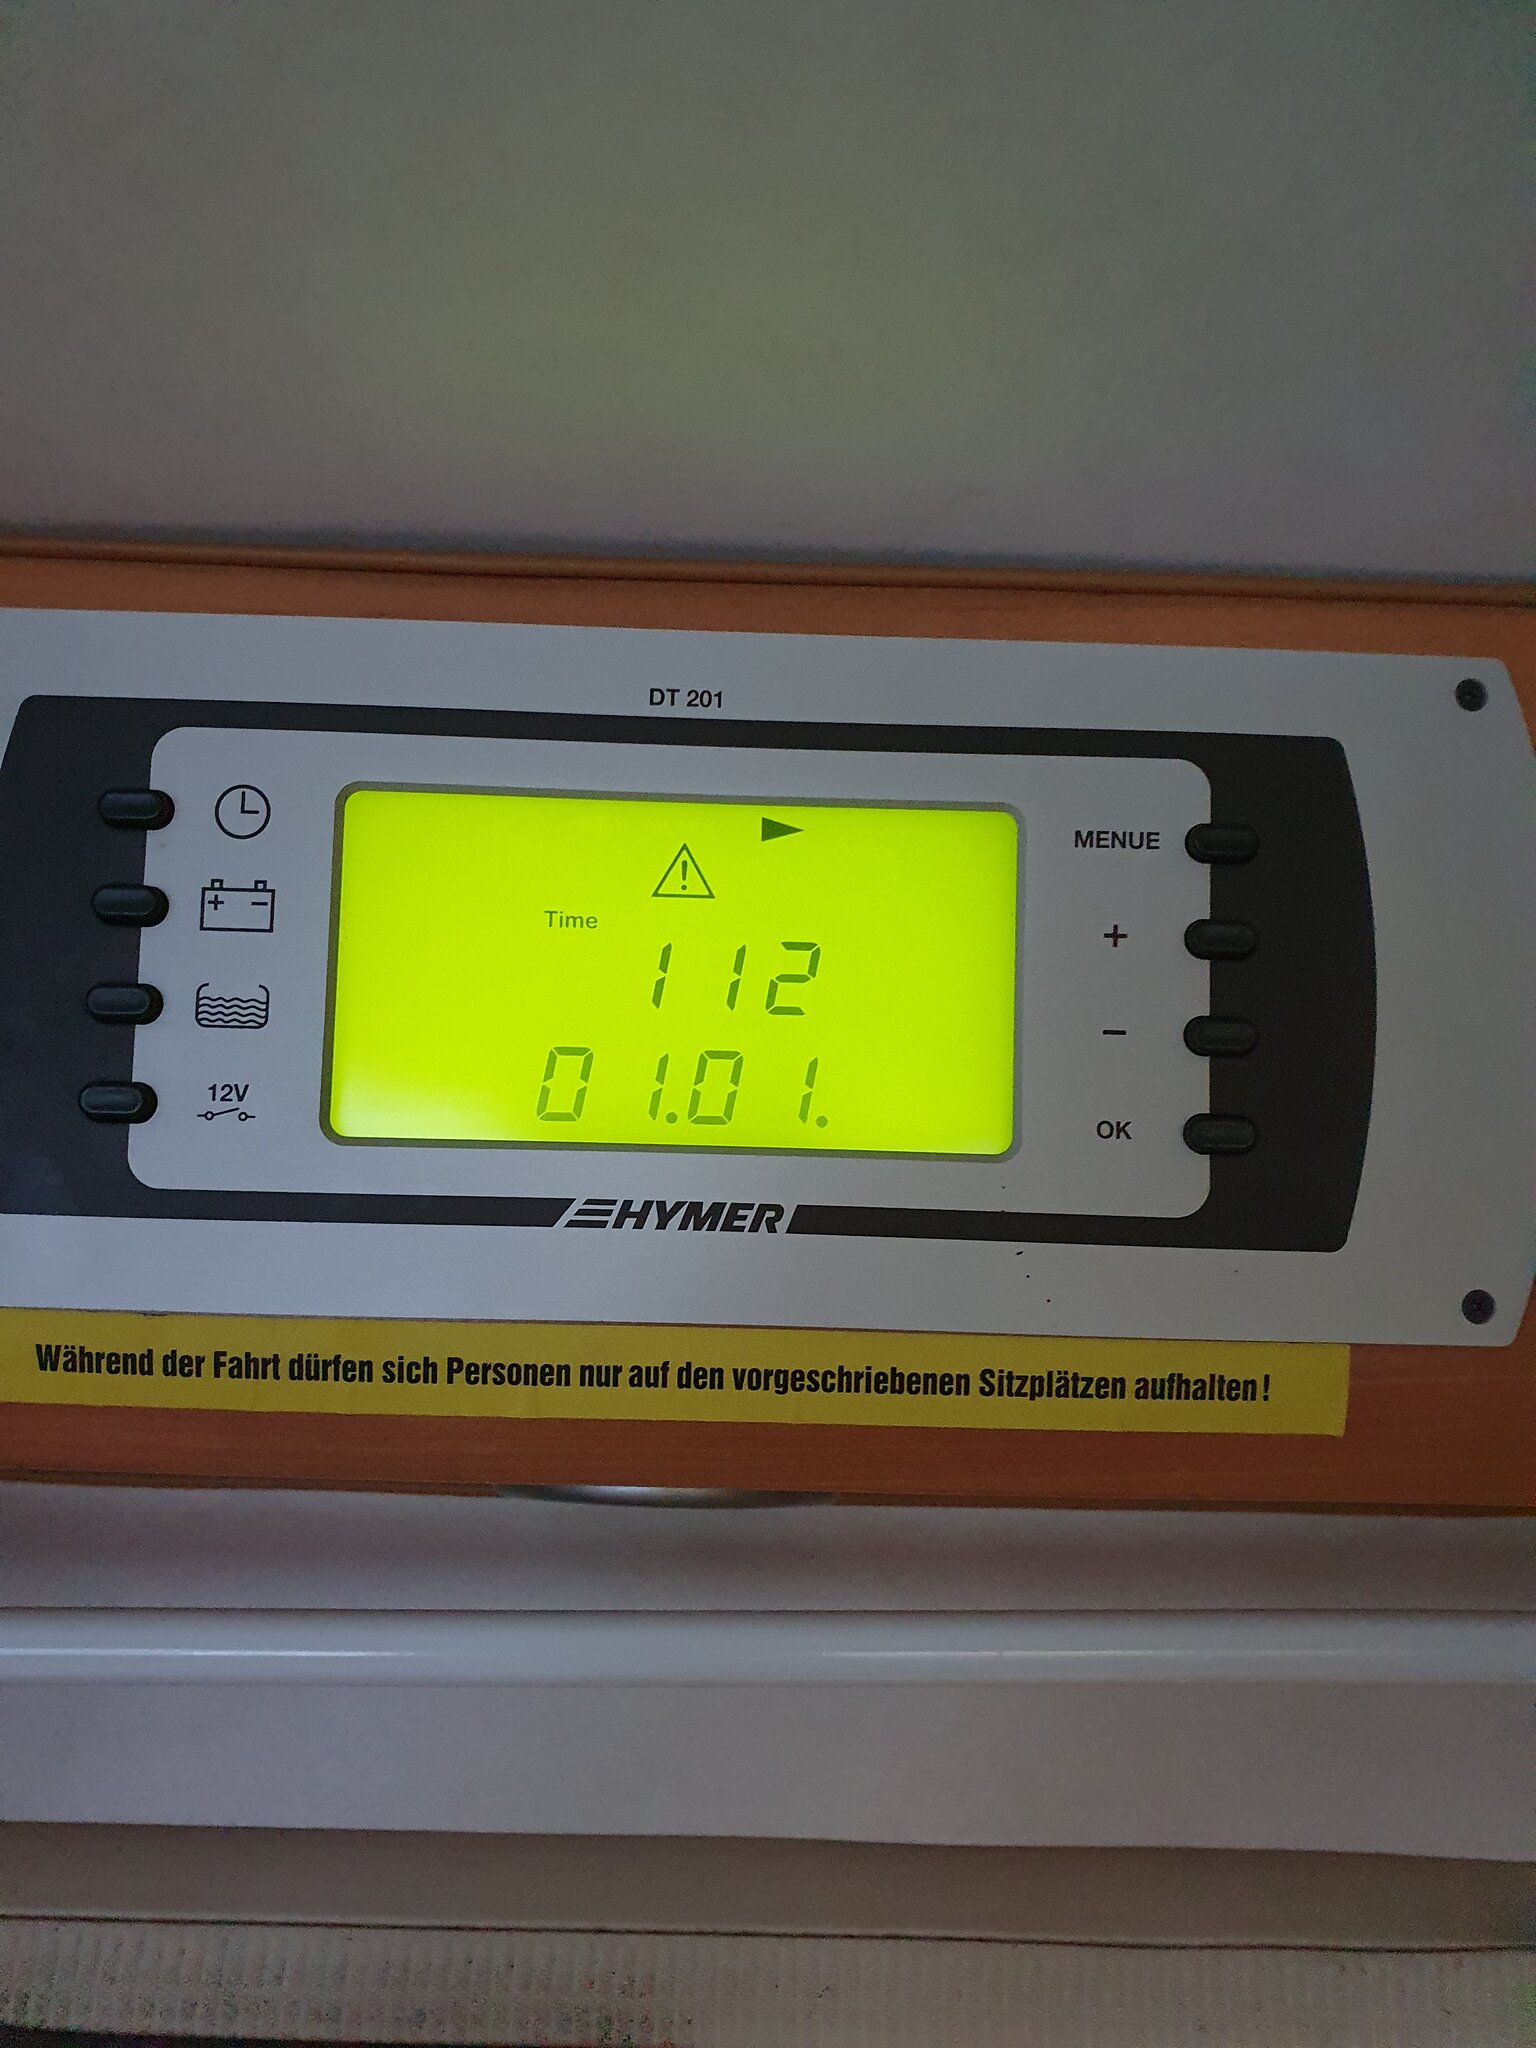 Control Panel DT201 not working propely after replacement leisure battery